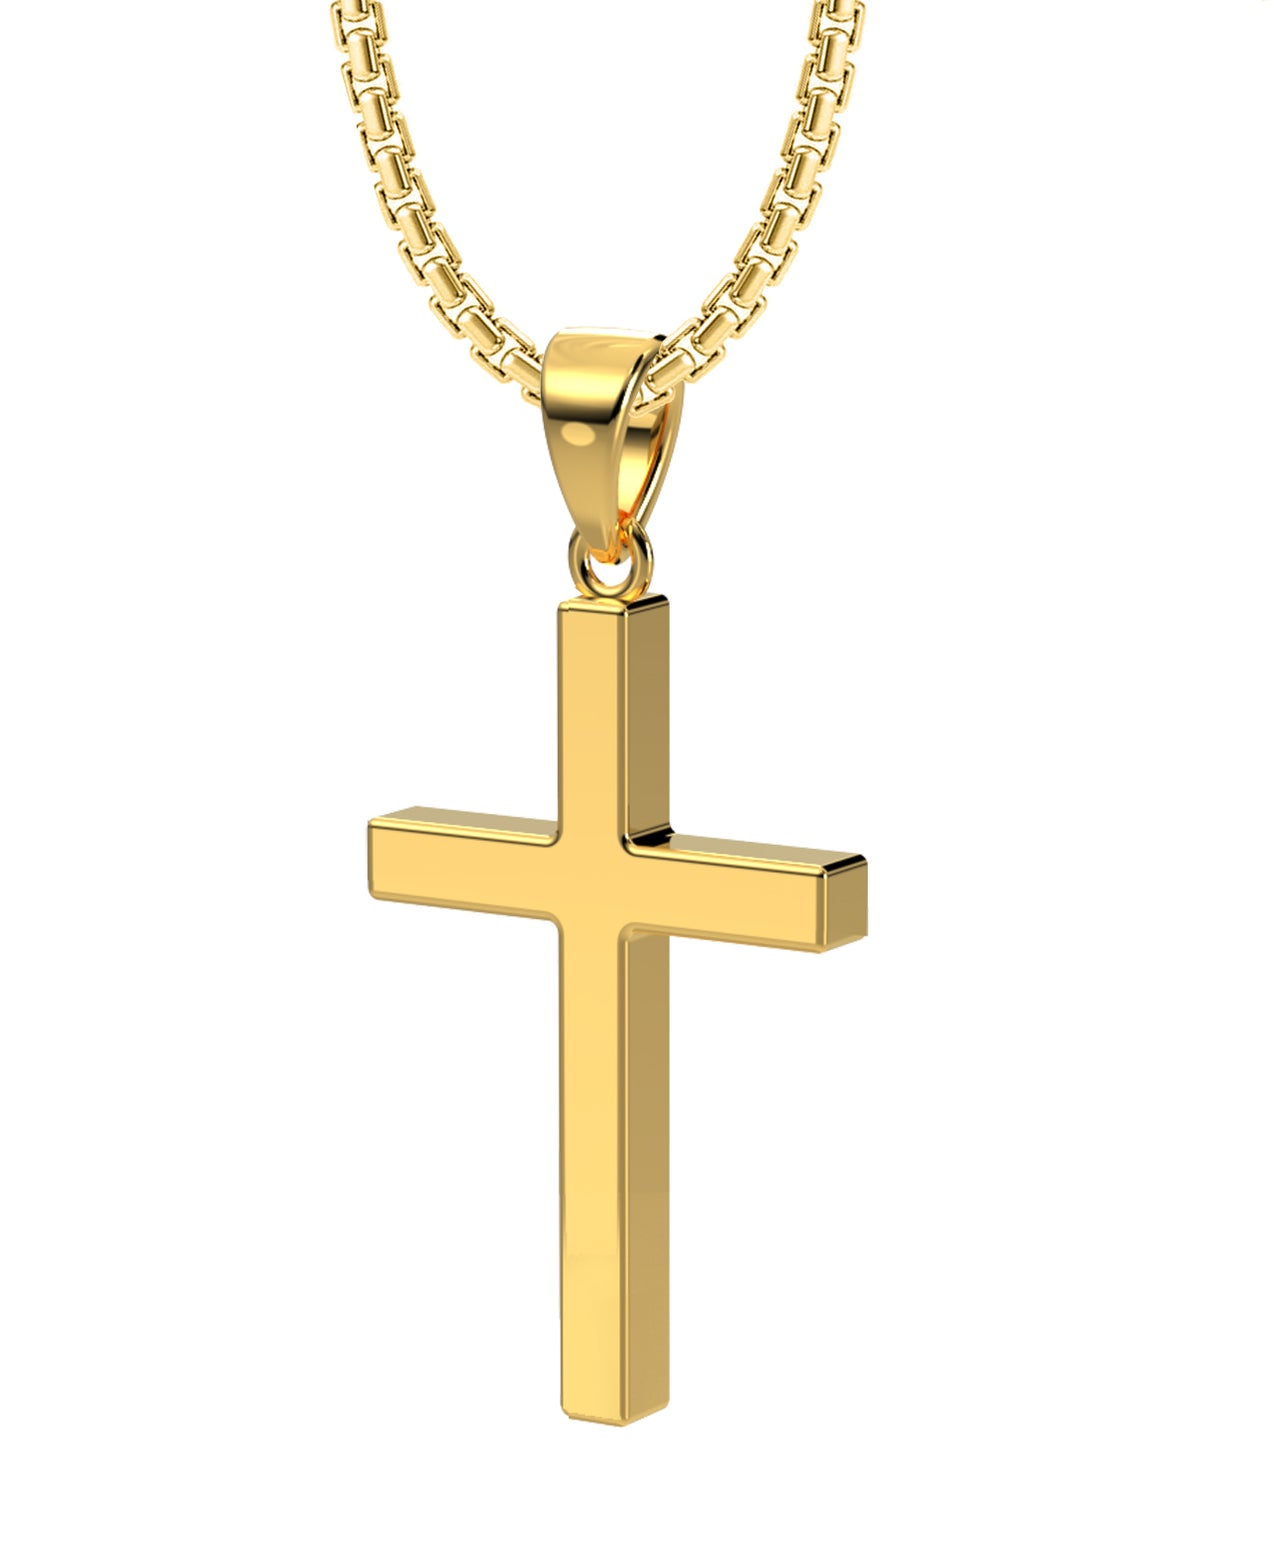 Ladies 14k Yellow Solid Gold 2.5mm x 2.5mm Box Cross Pendant Necklace, 26mm